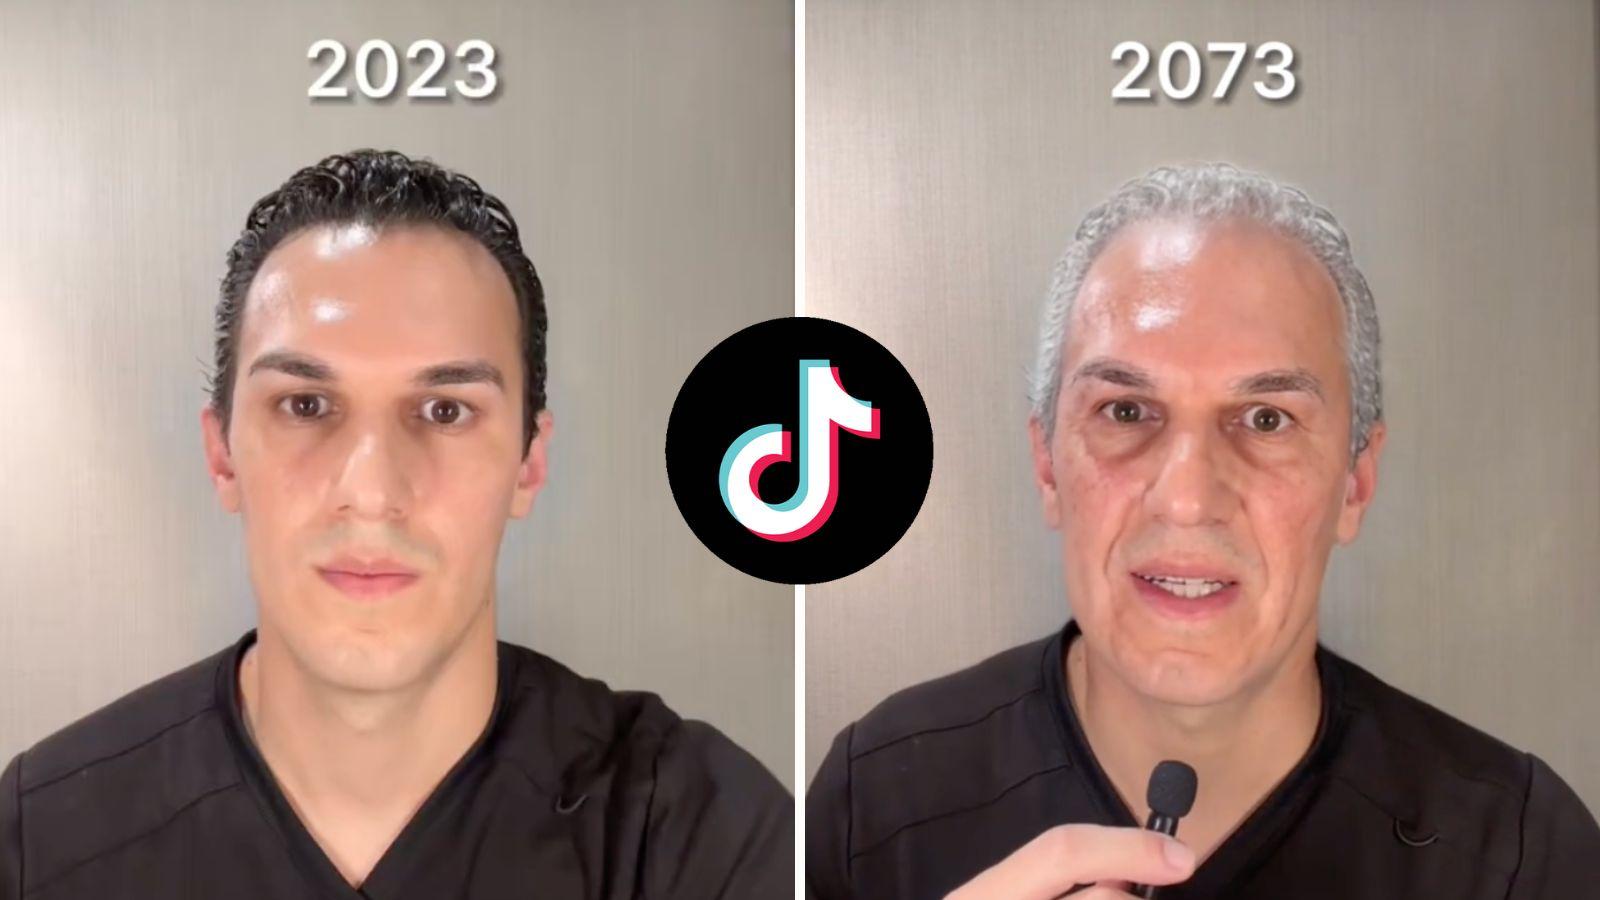 How to get the Time Travel Filter on TikTok